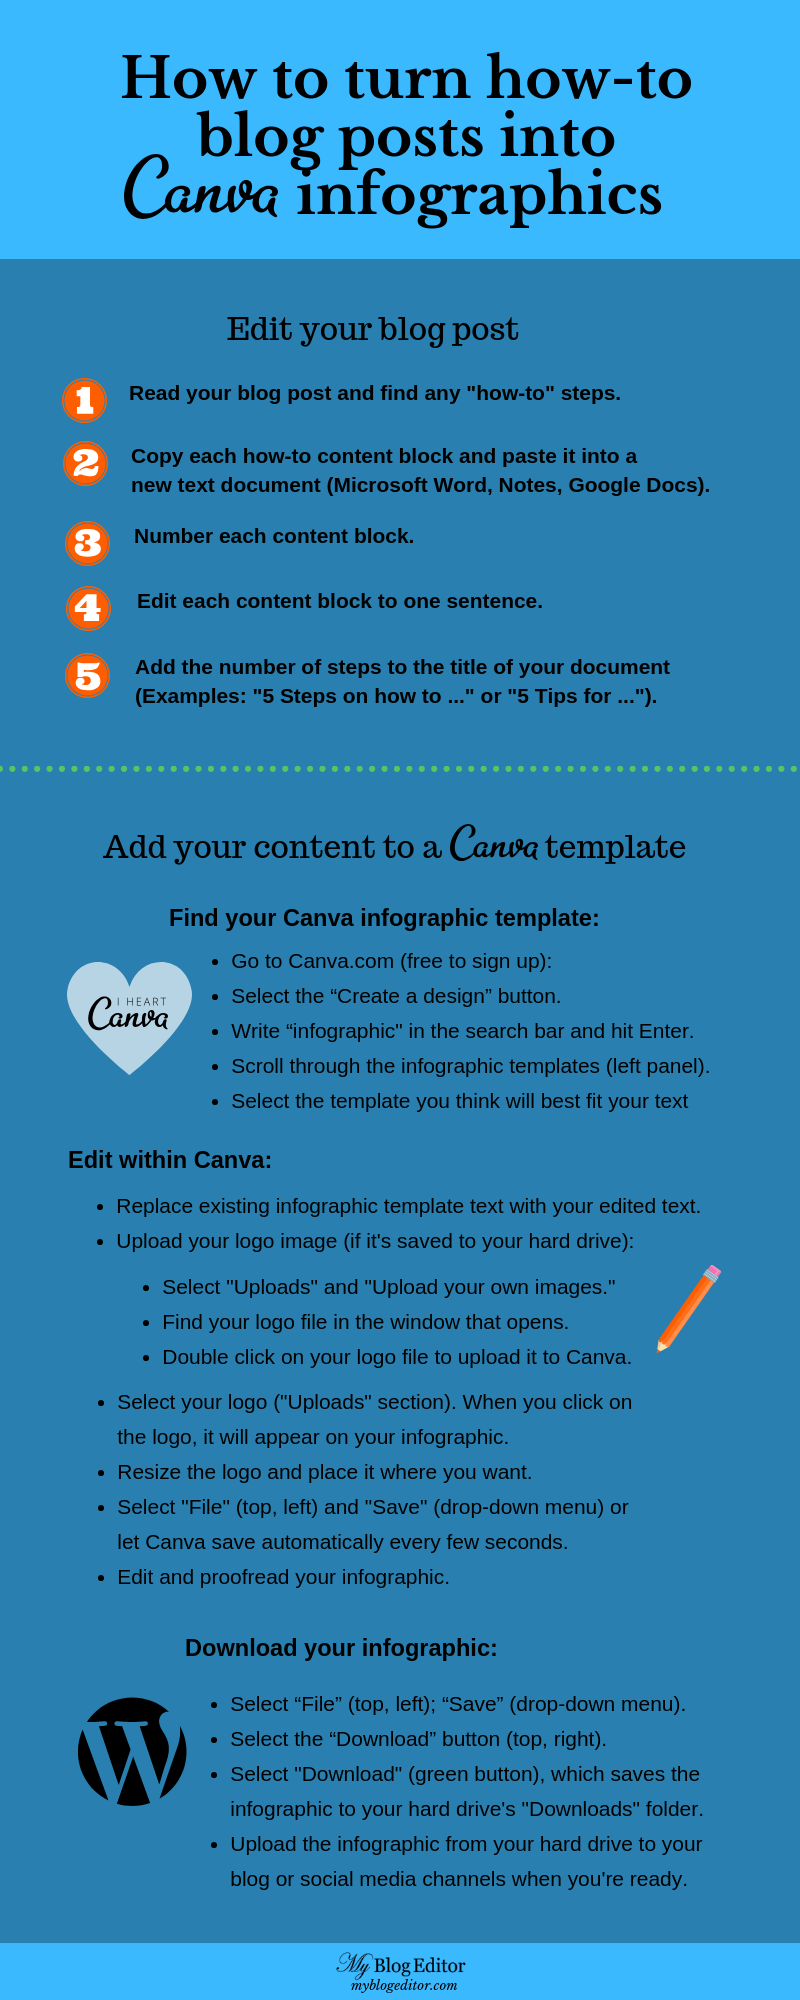 My Blog Editor infographic: How to turn how-to blog posts into Canva infographics